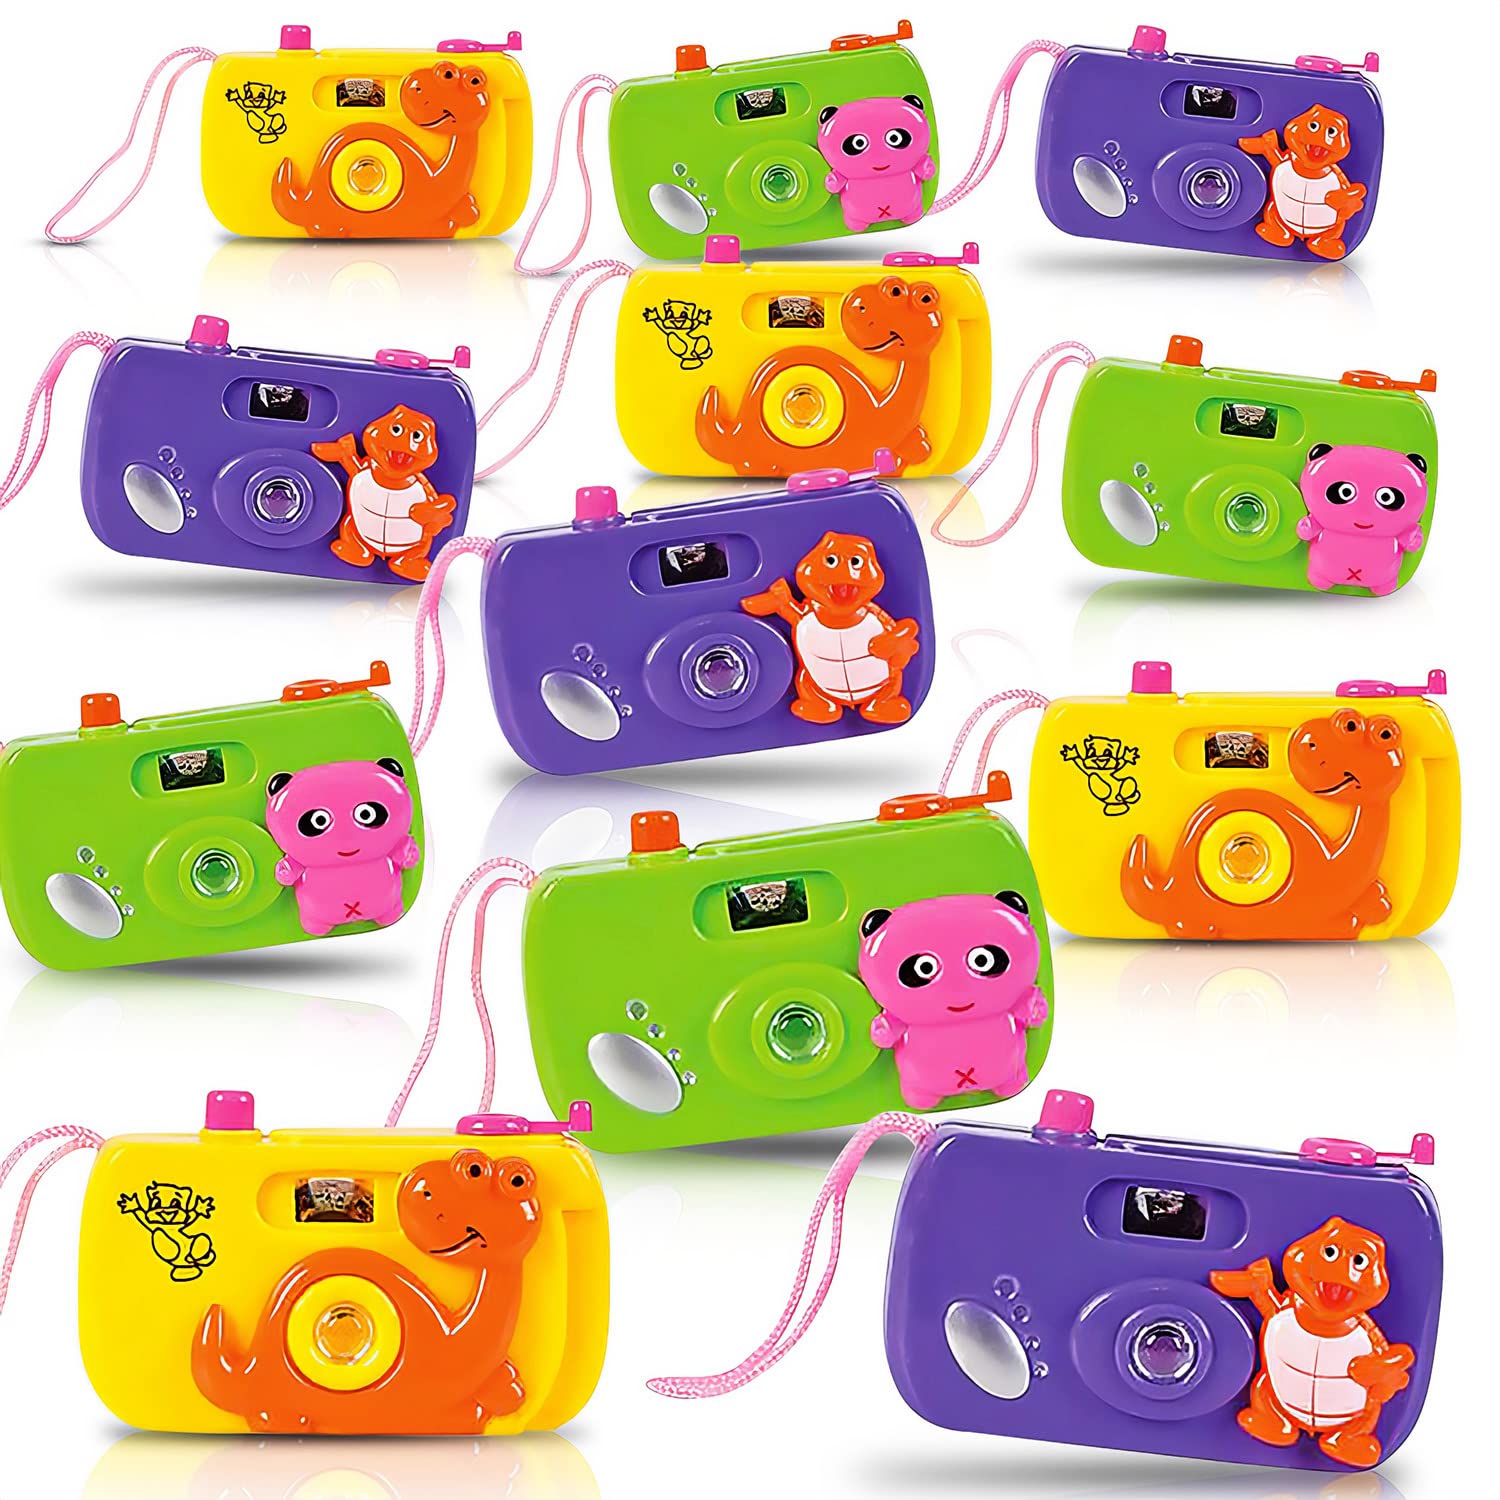 ArtCreativity Kids’ Camera Toy Set - Pack of 12 - Children’s Pretend Play Prop with Images in Viewfinder - Birthday Party Favors, Goodie Bag Fillers, Holiday Gift Idea for Boys, Girls, Toddler